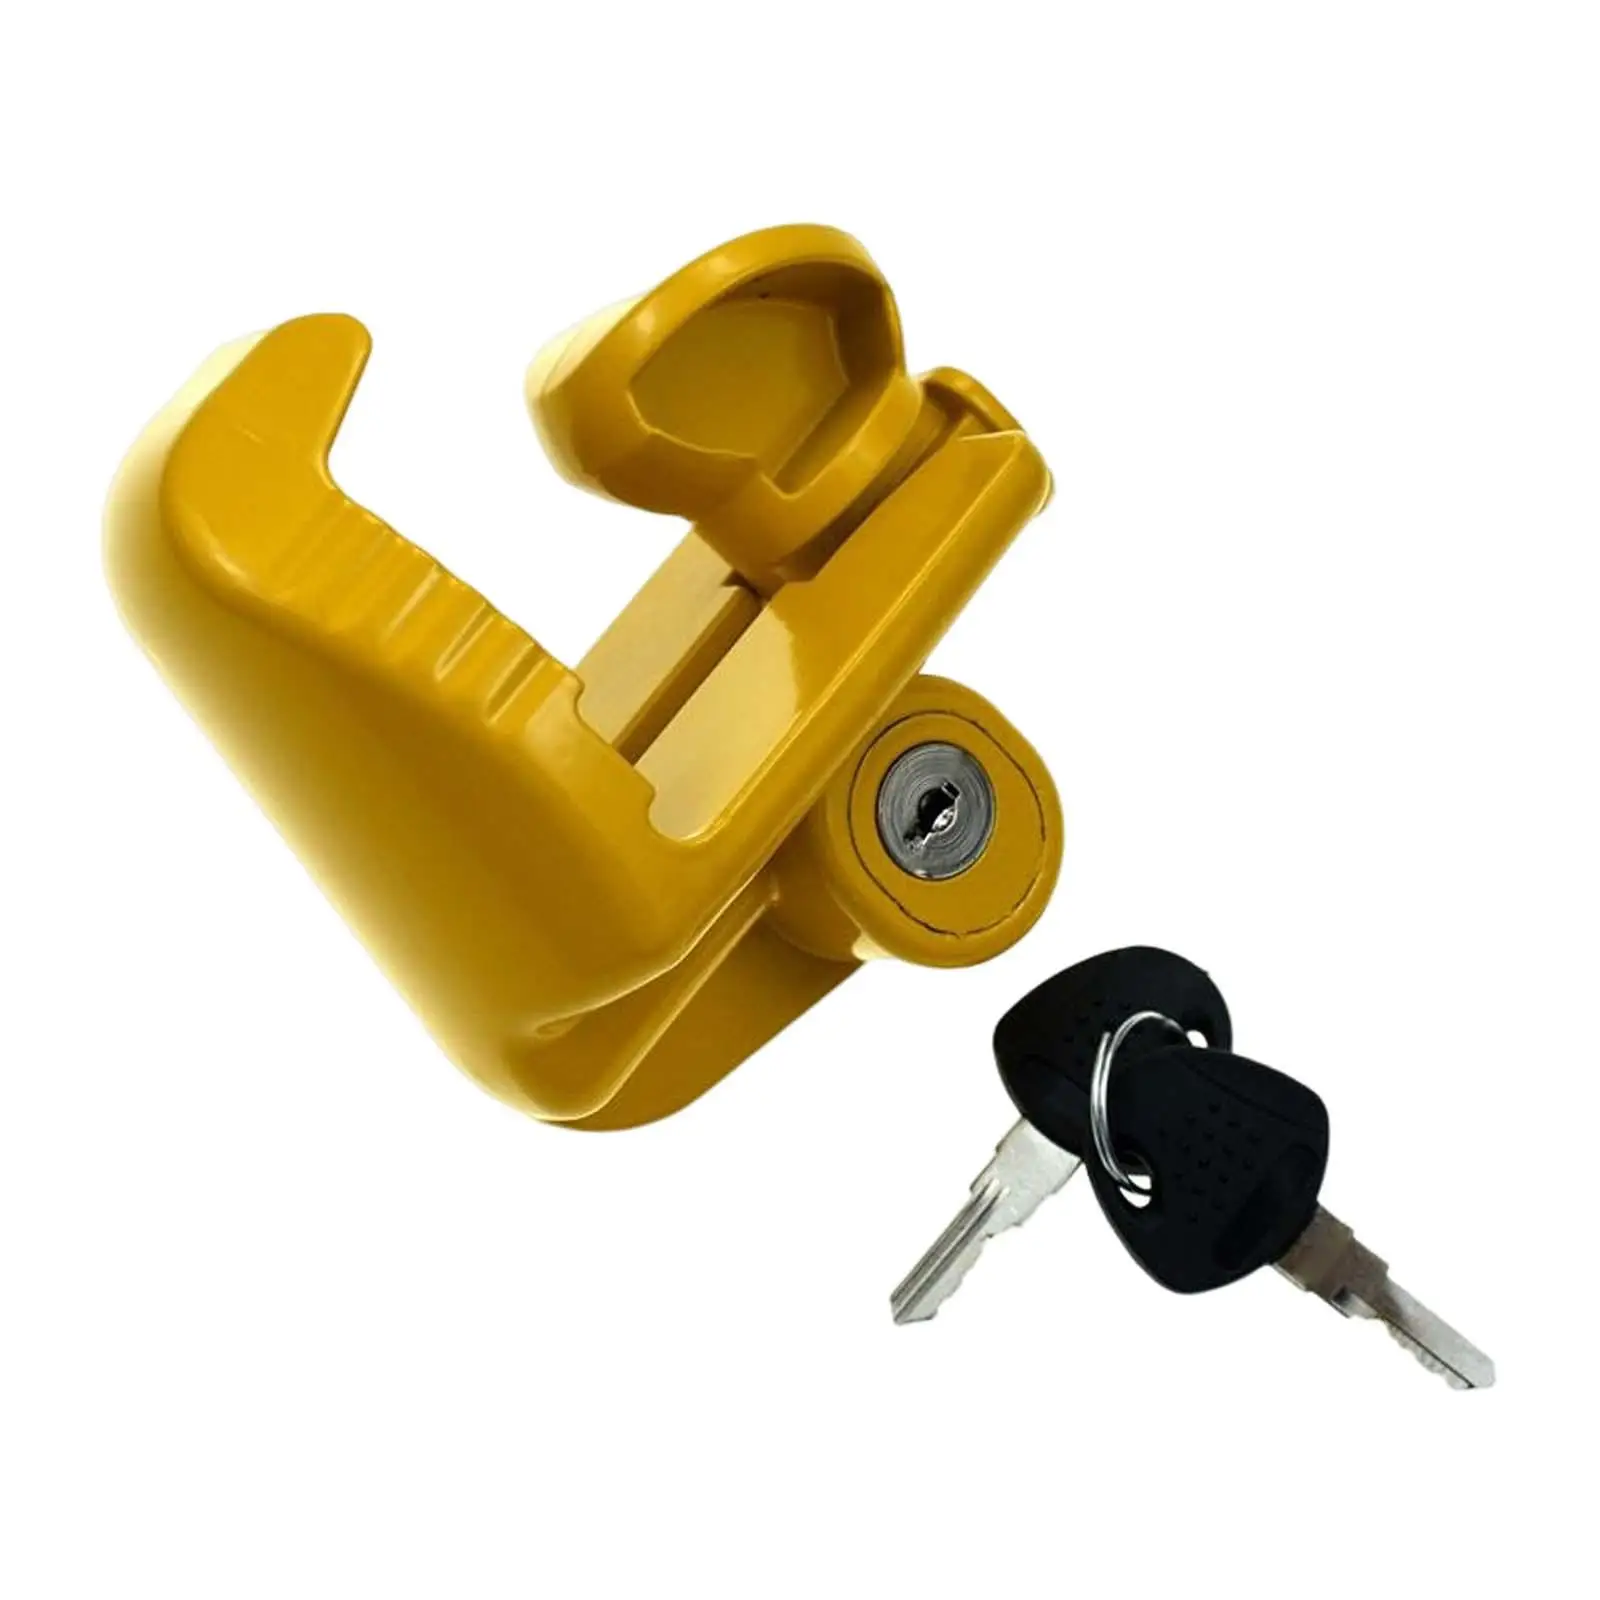 Coupler Lock Universal Accessories Spare Parts Durable Trailer Ball Coupler Adjustable Portable Professional Yellow